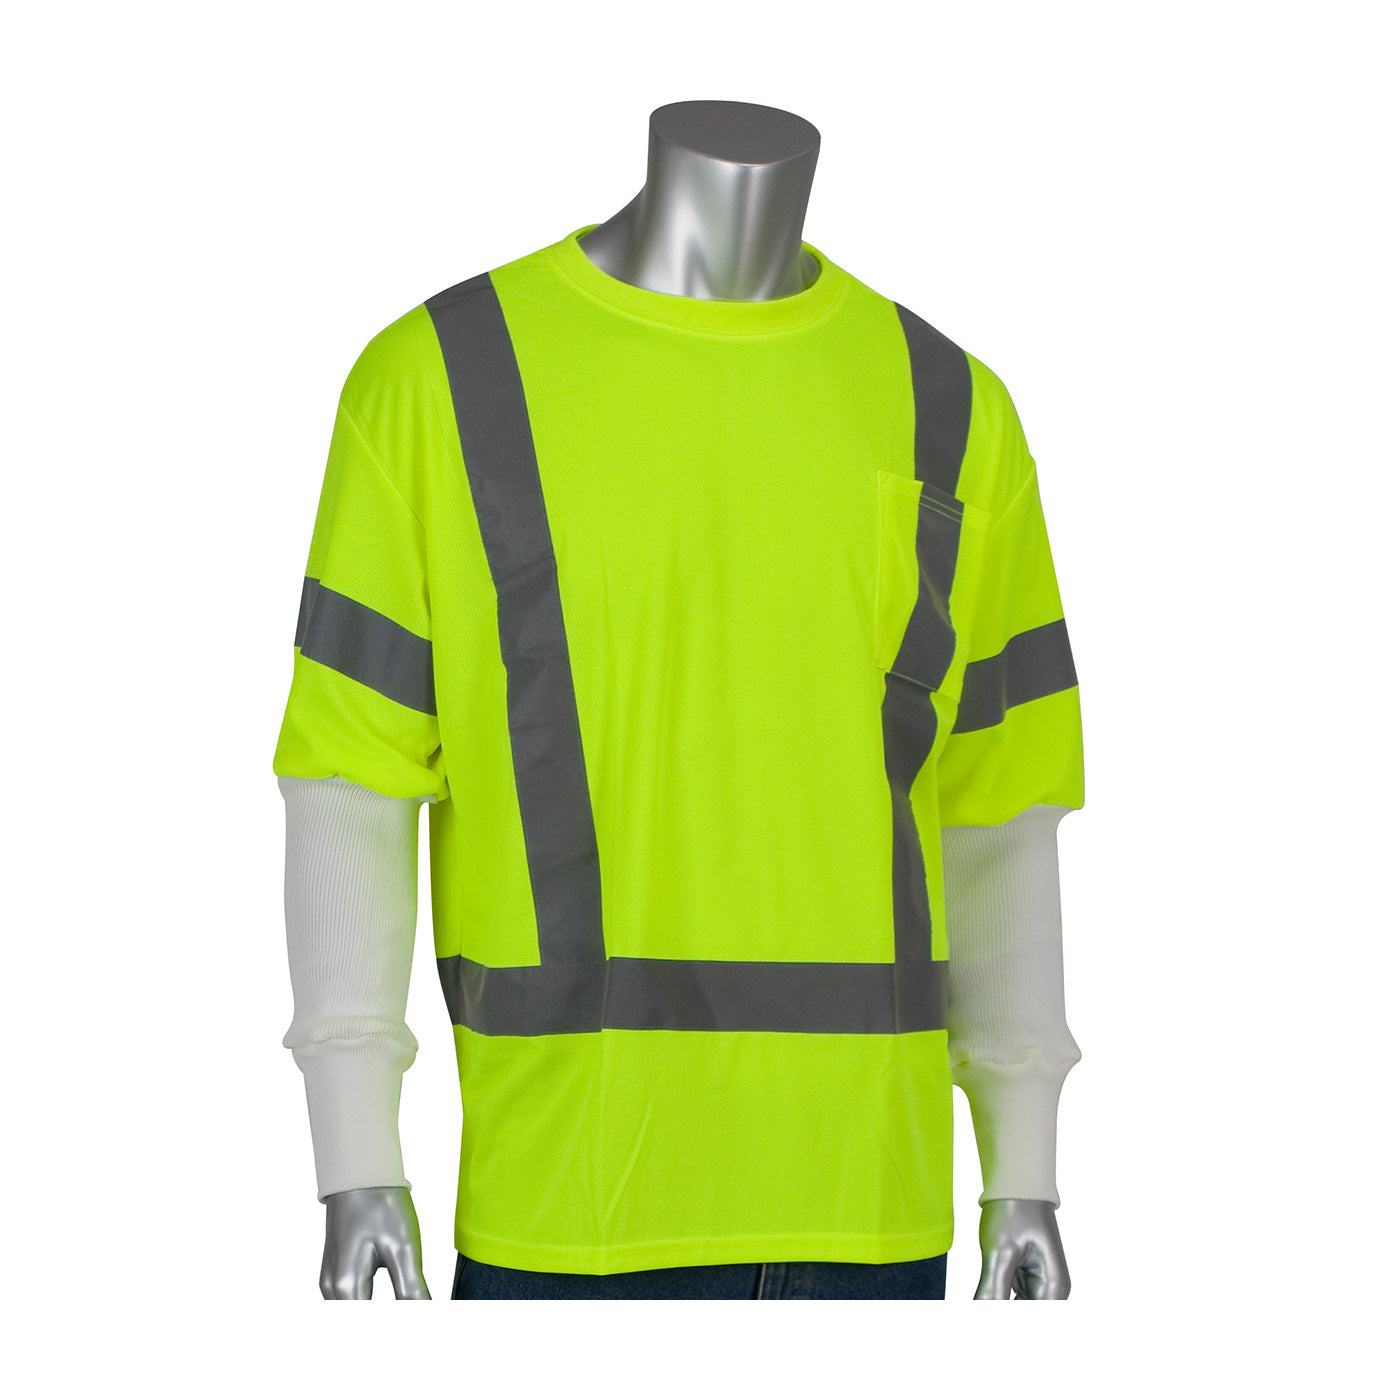 Protective Industrial Products-ANSI TYPE R CLASS 3 SHORT SLEEVE T-SHIRT WITH INTEGRATED PRITEX™ ANTIMICROBIAL SLEEVE Shirt-eSafety Supplies, Inc